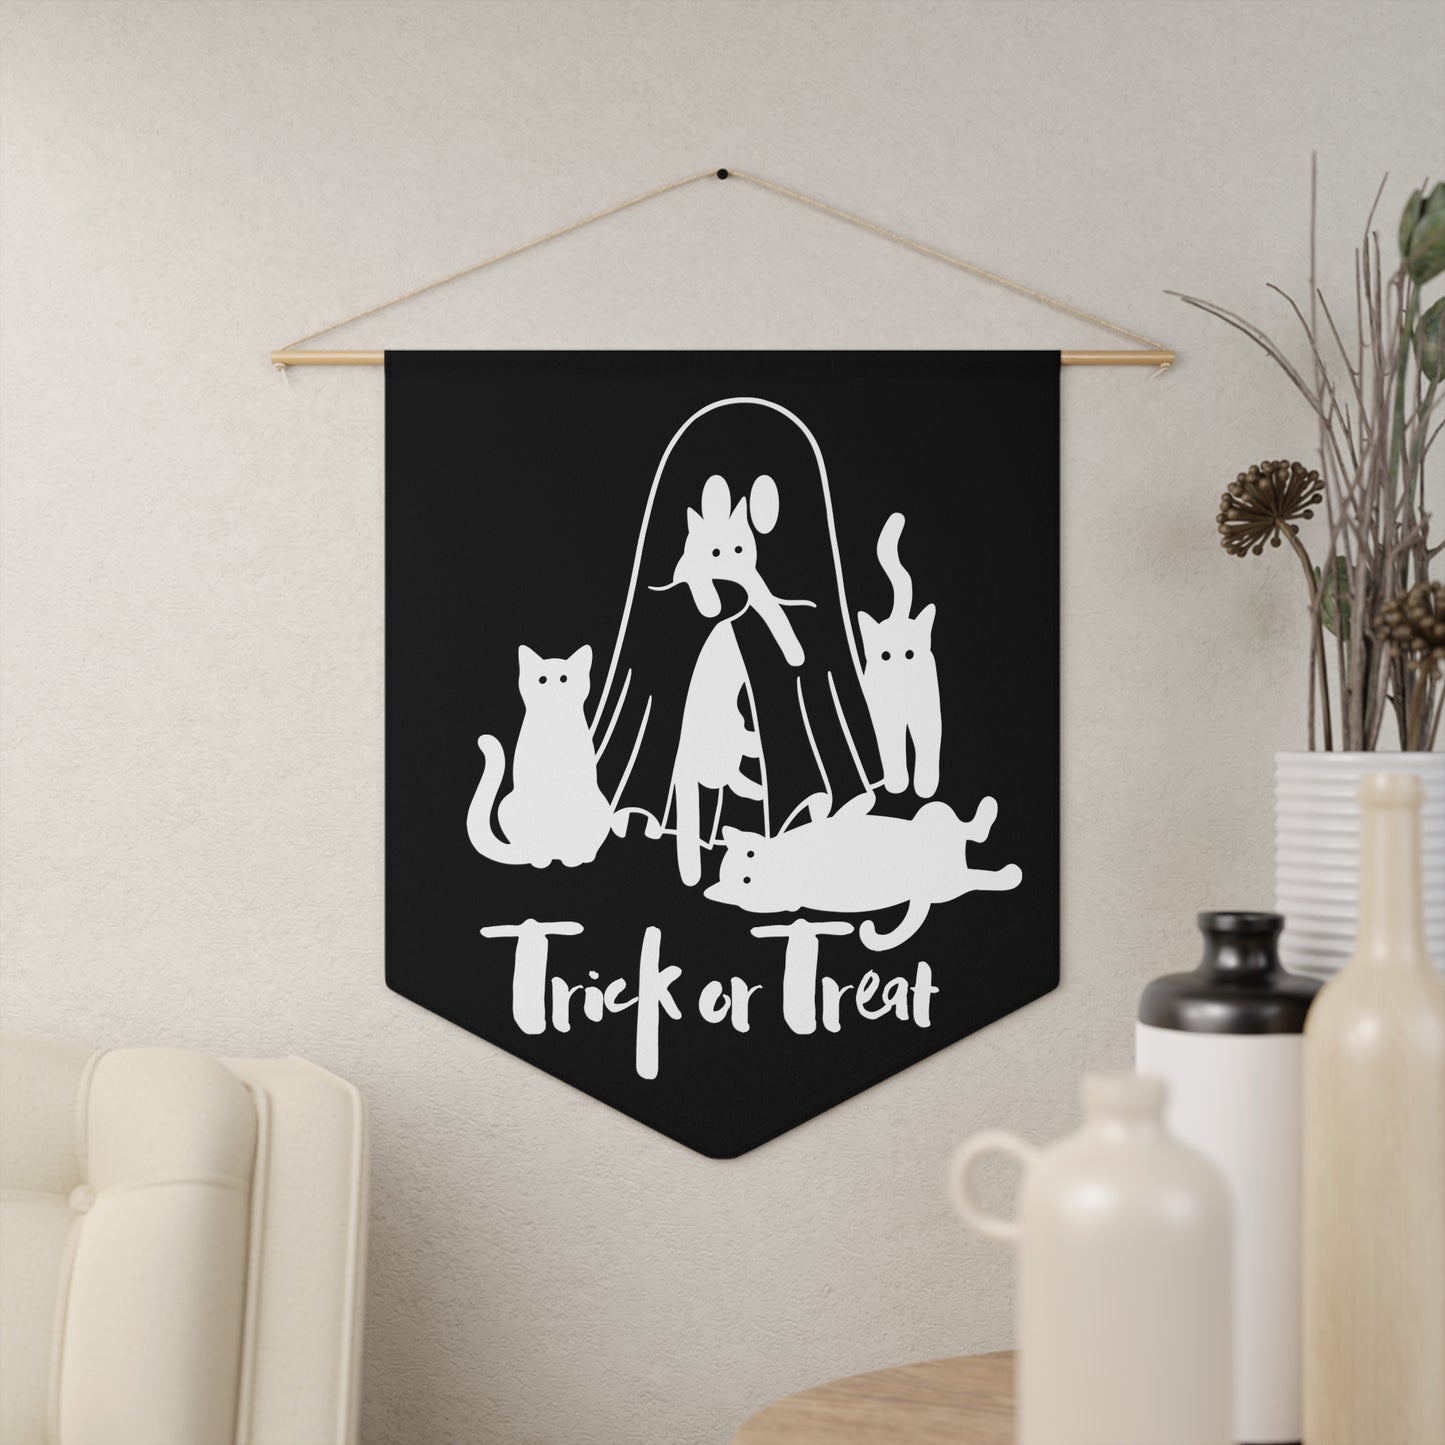 Ghost and cats pennant, Cat Halloween flag pennant, Spooky Season pennant, Black Cats Ghost Halloween home decor, Halloween Home accessory